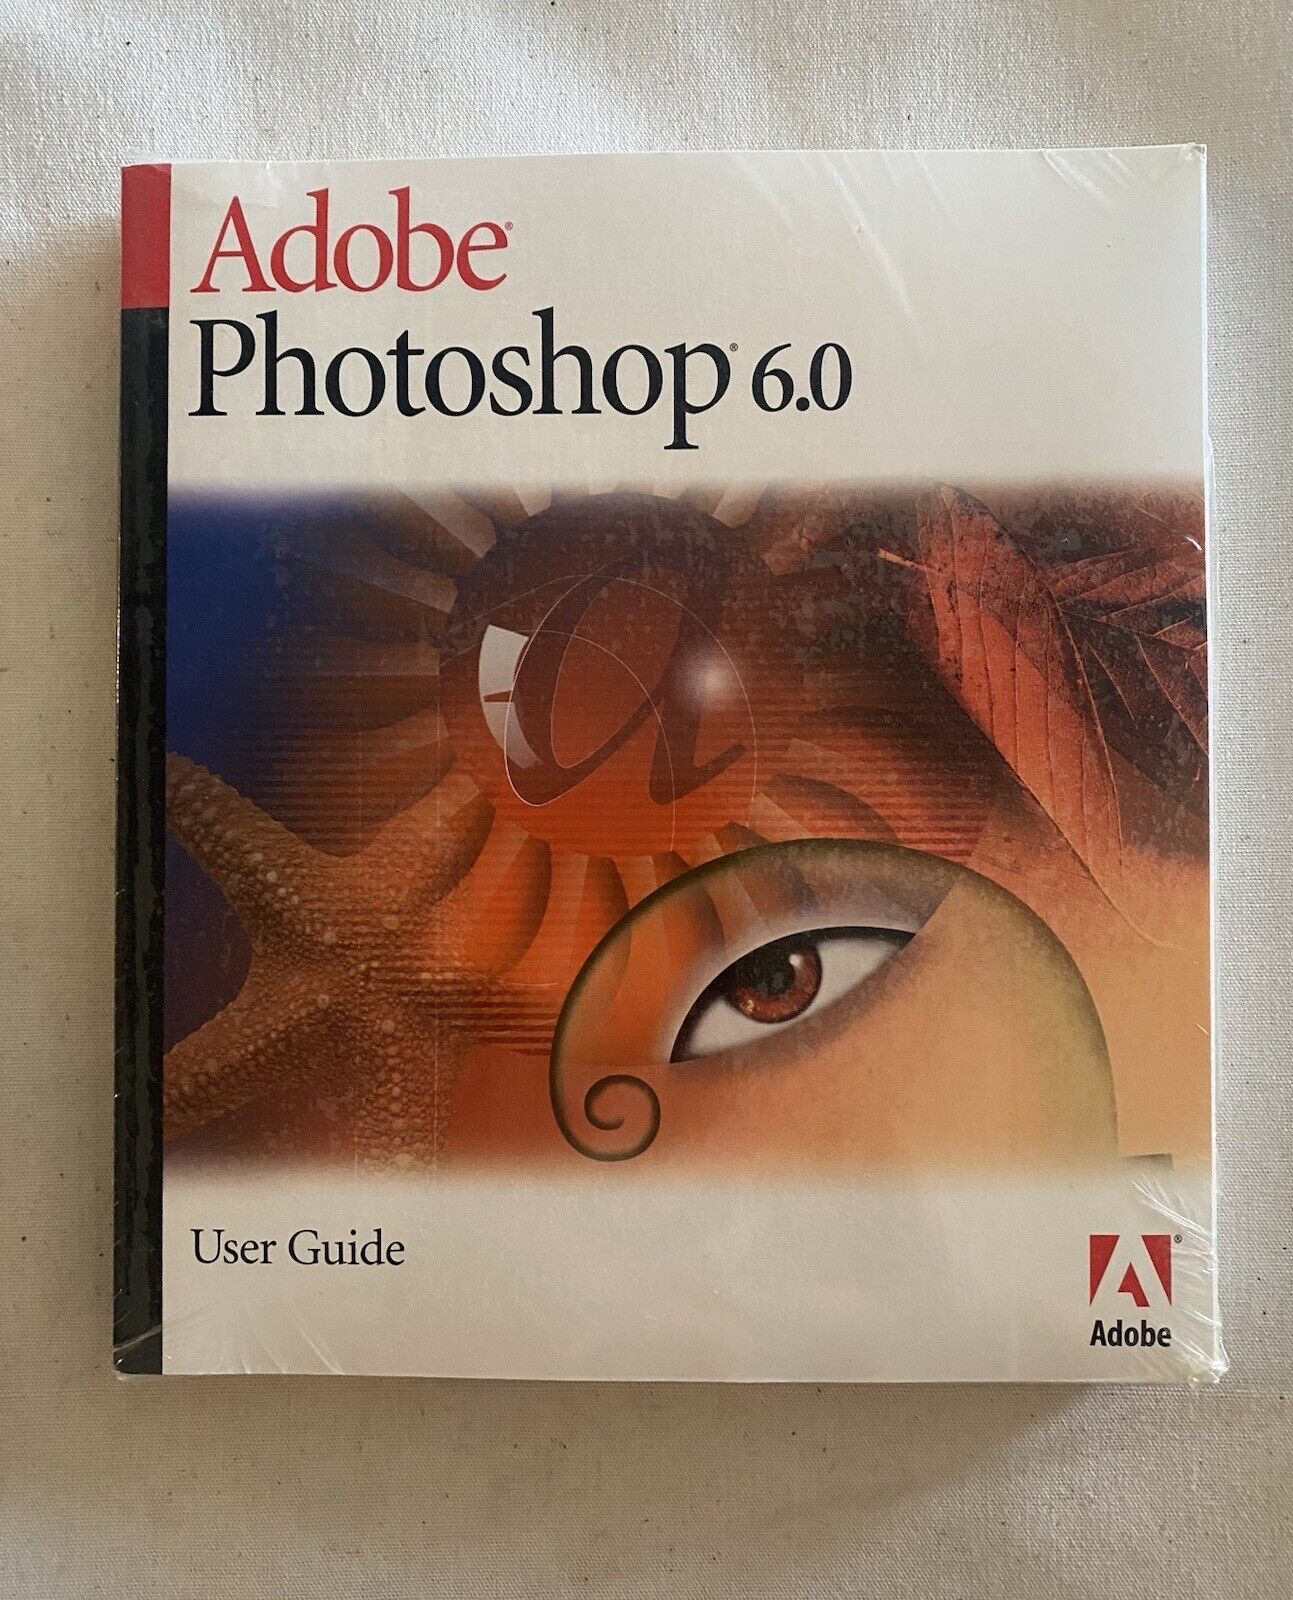 Sealed Adobe Photoshop 6.0 Full Retail Version Paperback For MAC. Book Only